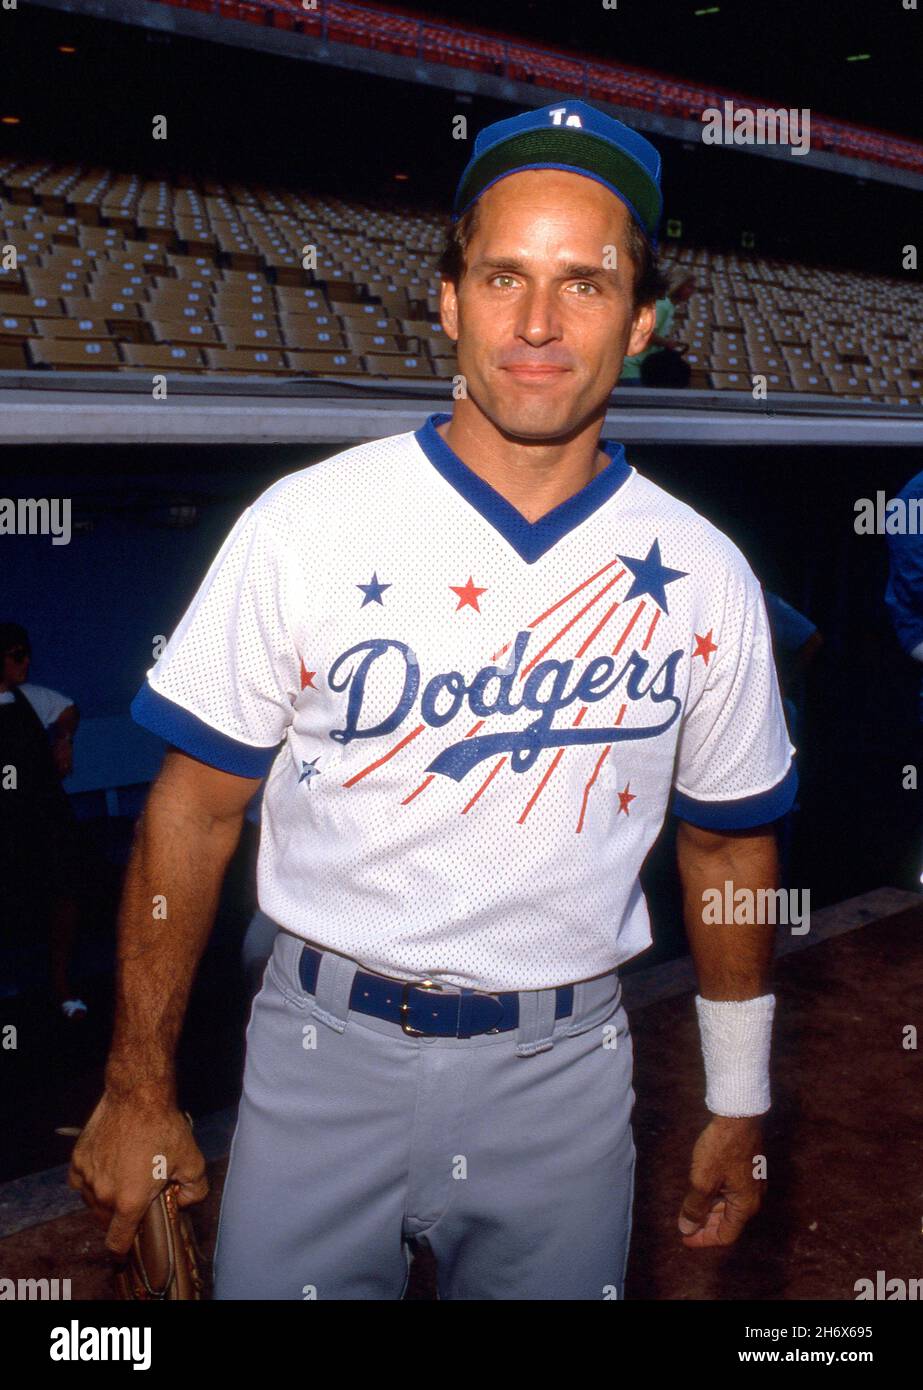 Gregory Harrison at the 32nd Annual 'Hollywood Stars Night' Celebrity Baseball Game on August 18, 1990 at Dodger Stadium in Los Angeles, California Credit: Ralph Dominguez/MediaPunch Stock Photo